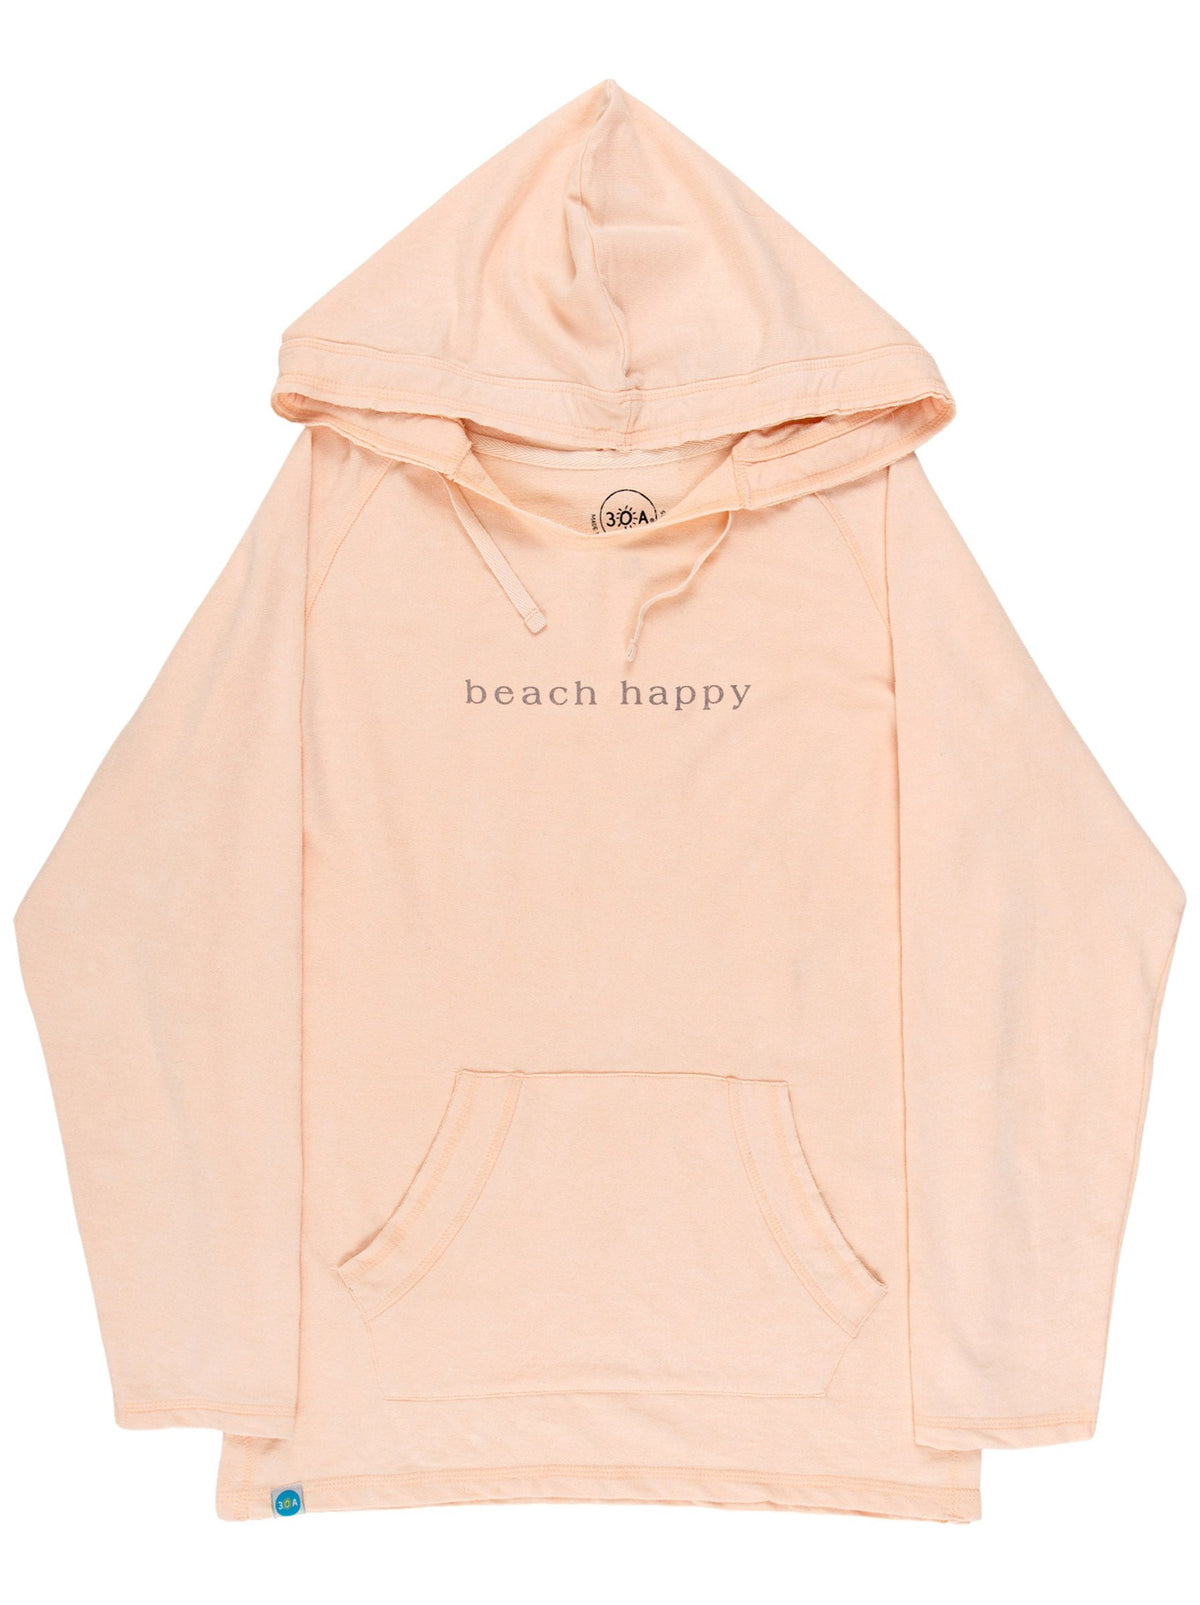 Simple Beach Happy French Terry Bonfire Hoodie